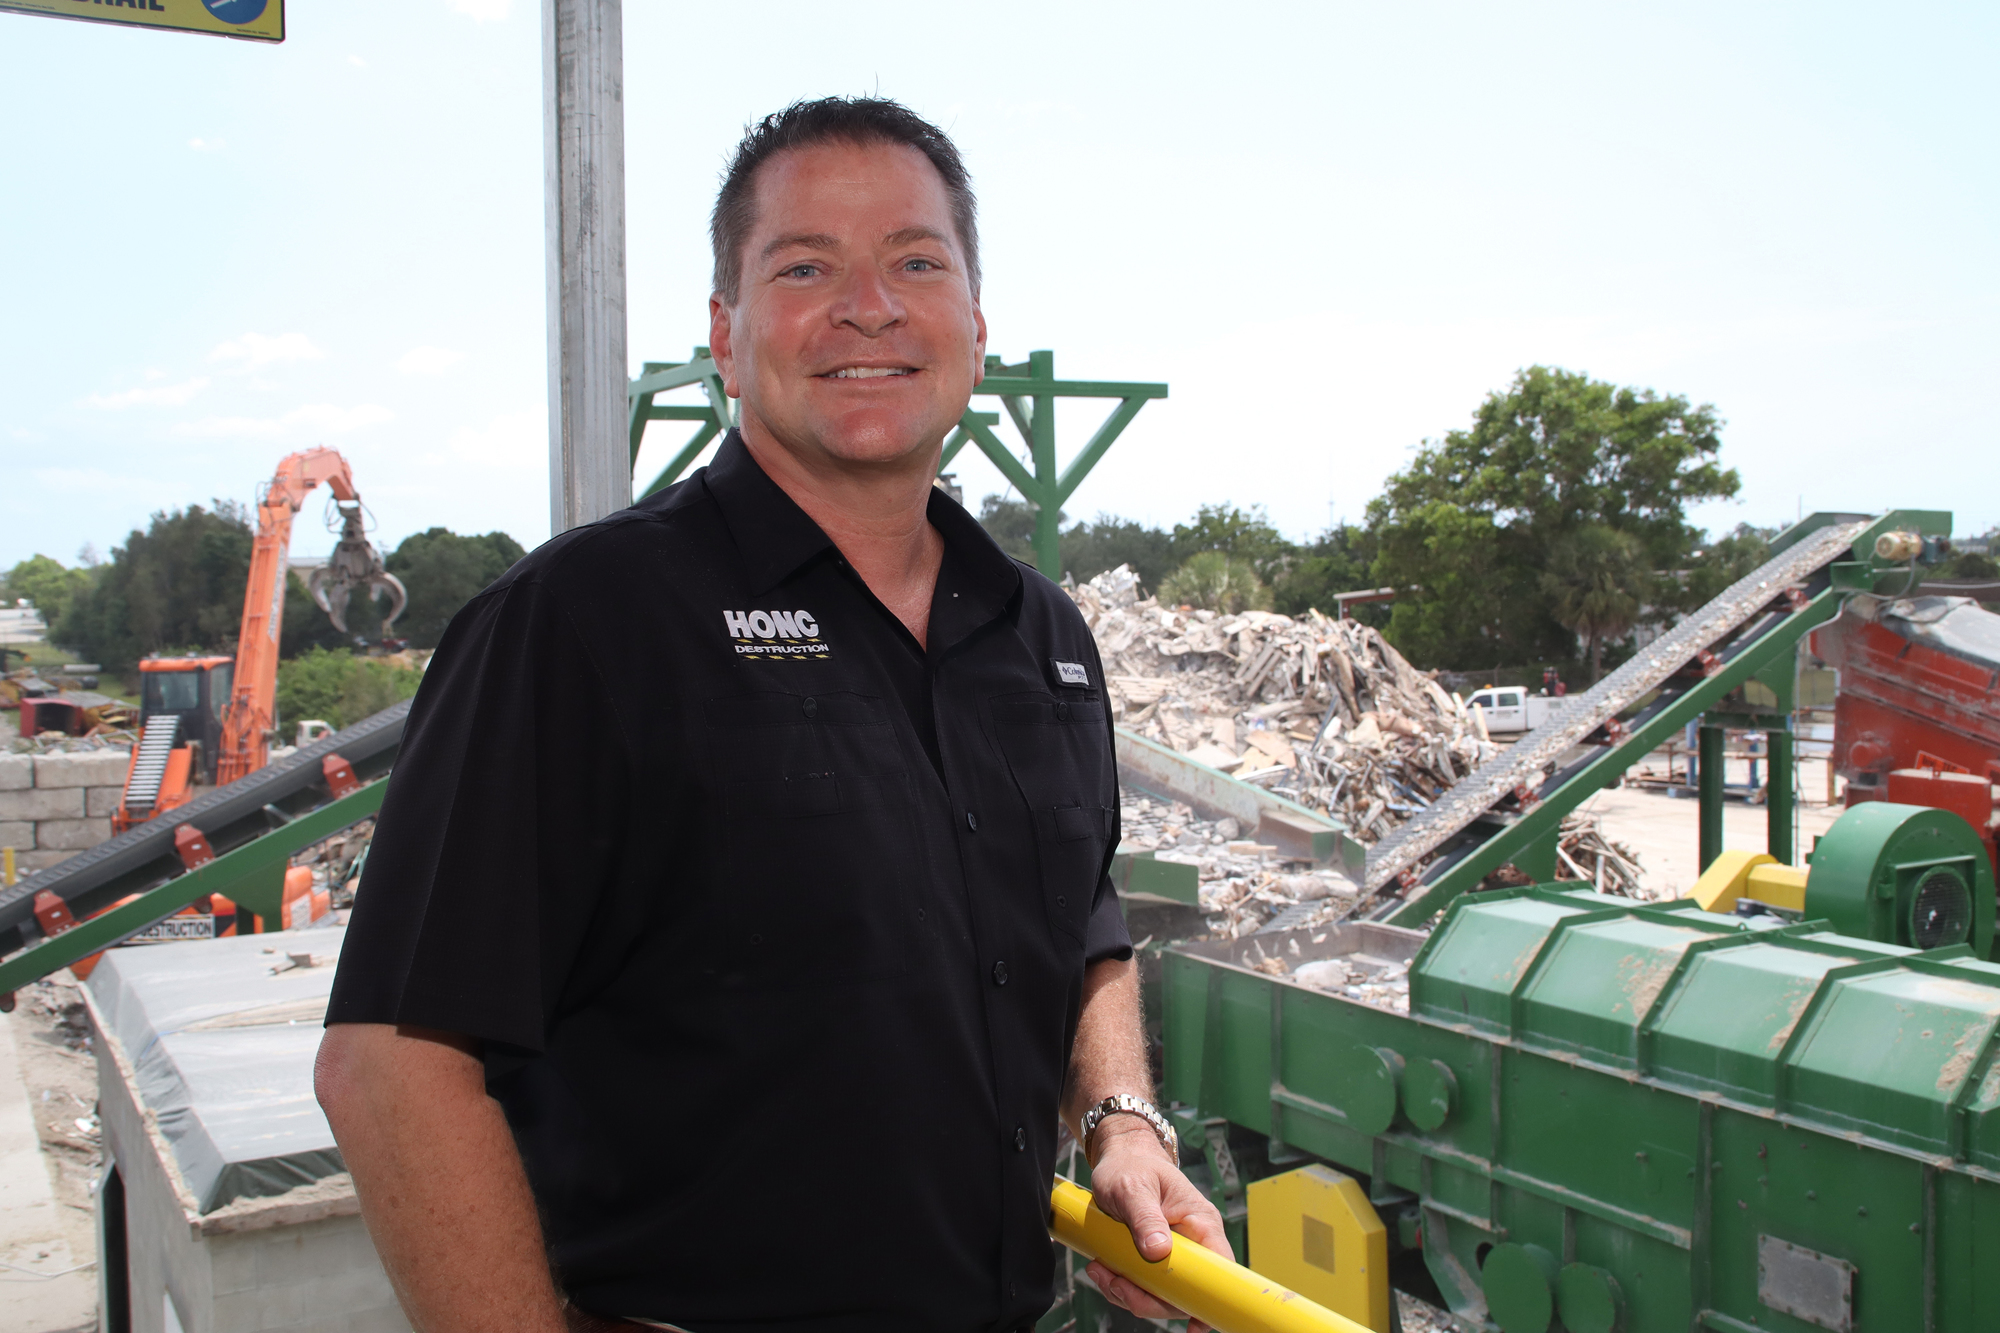 David Mulicka installed a $3 million sorting line at Honc Recycling about a year ago and expects the investment to pay for itself in a total of two years. JimJett.com photo